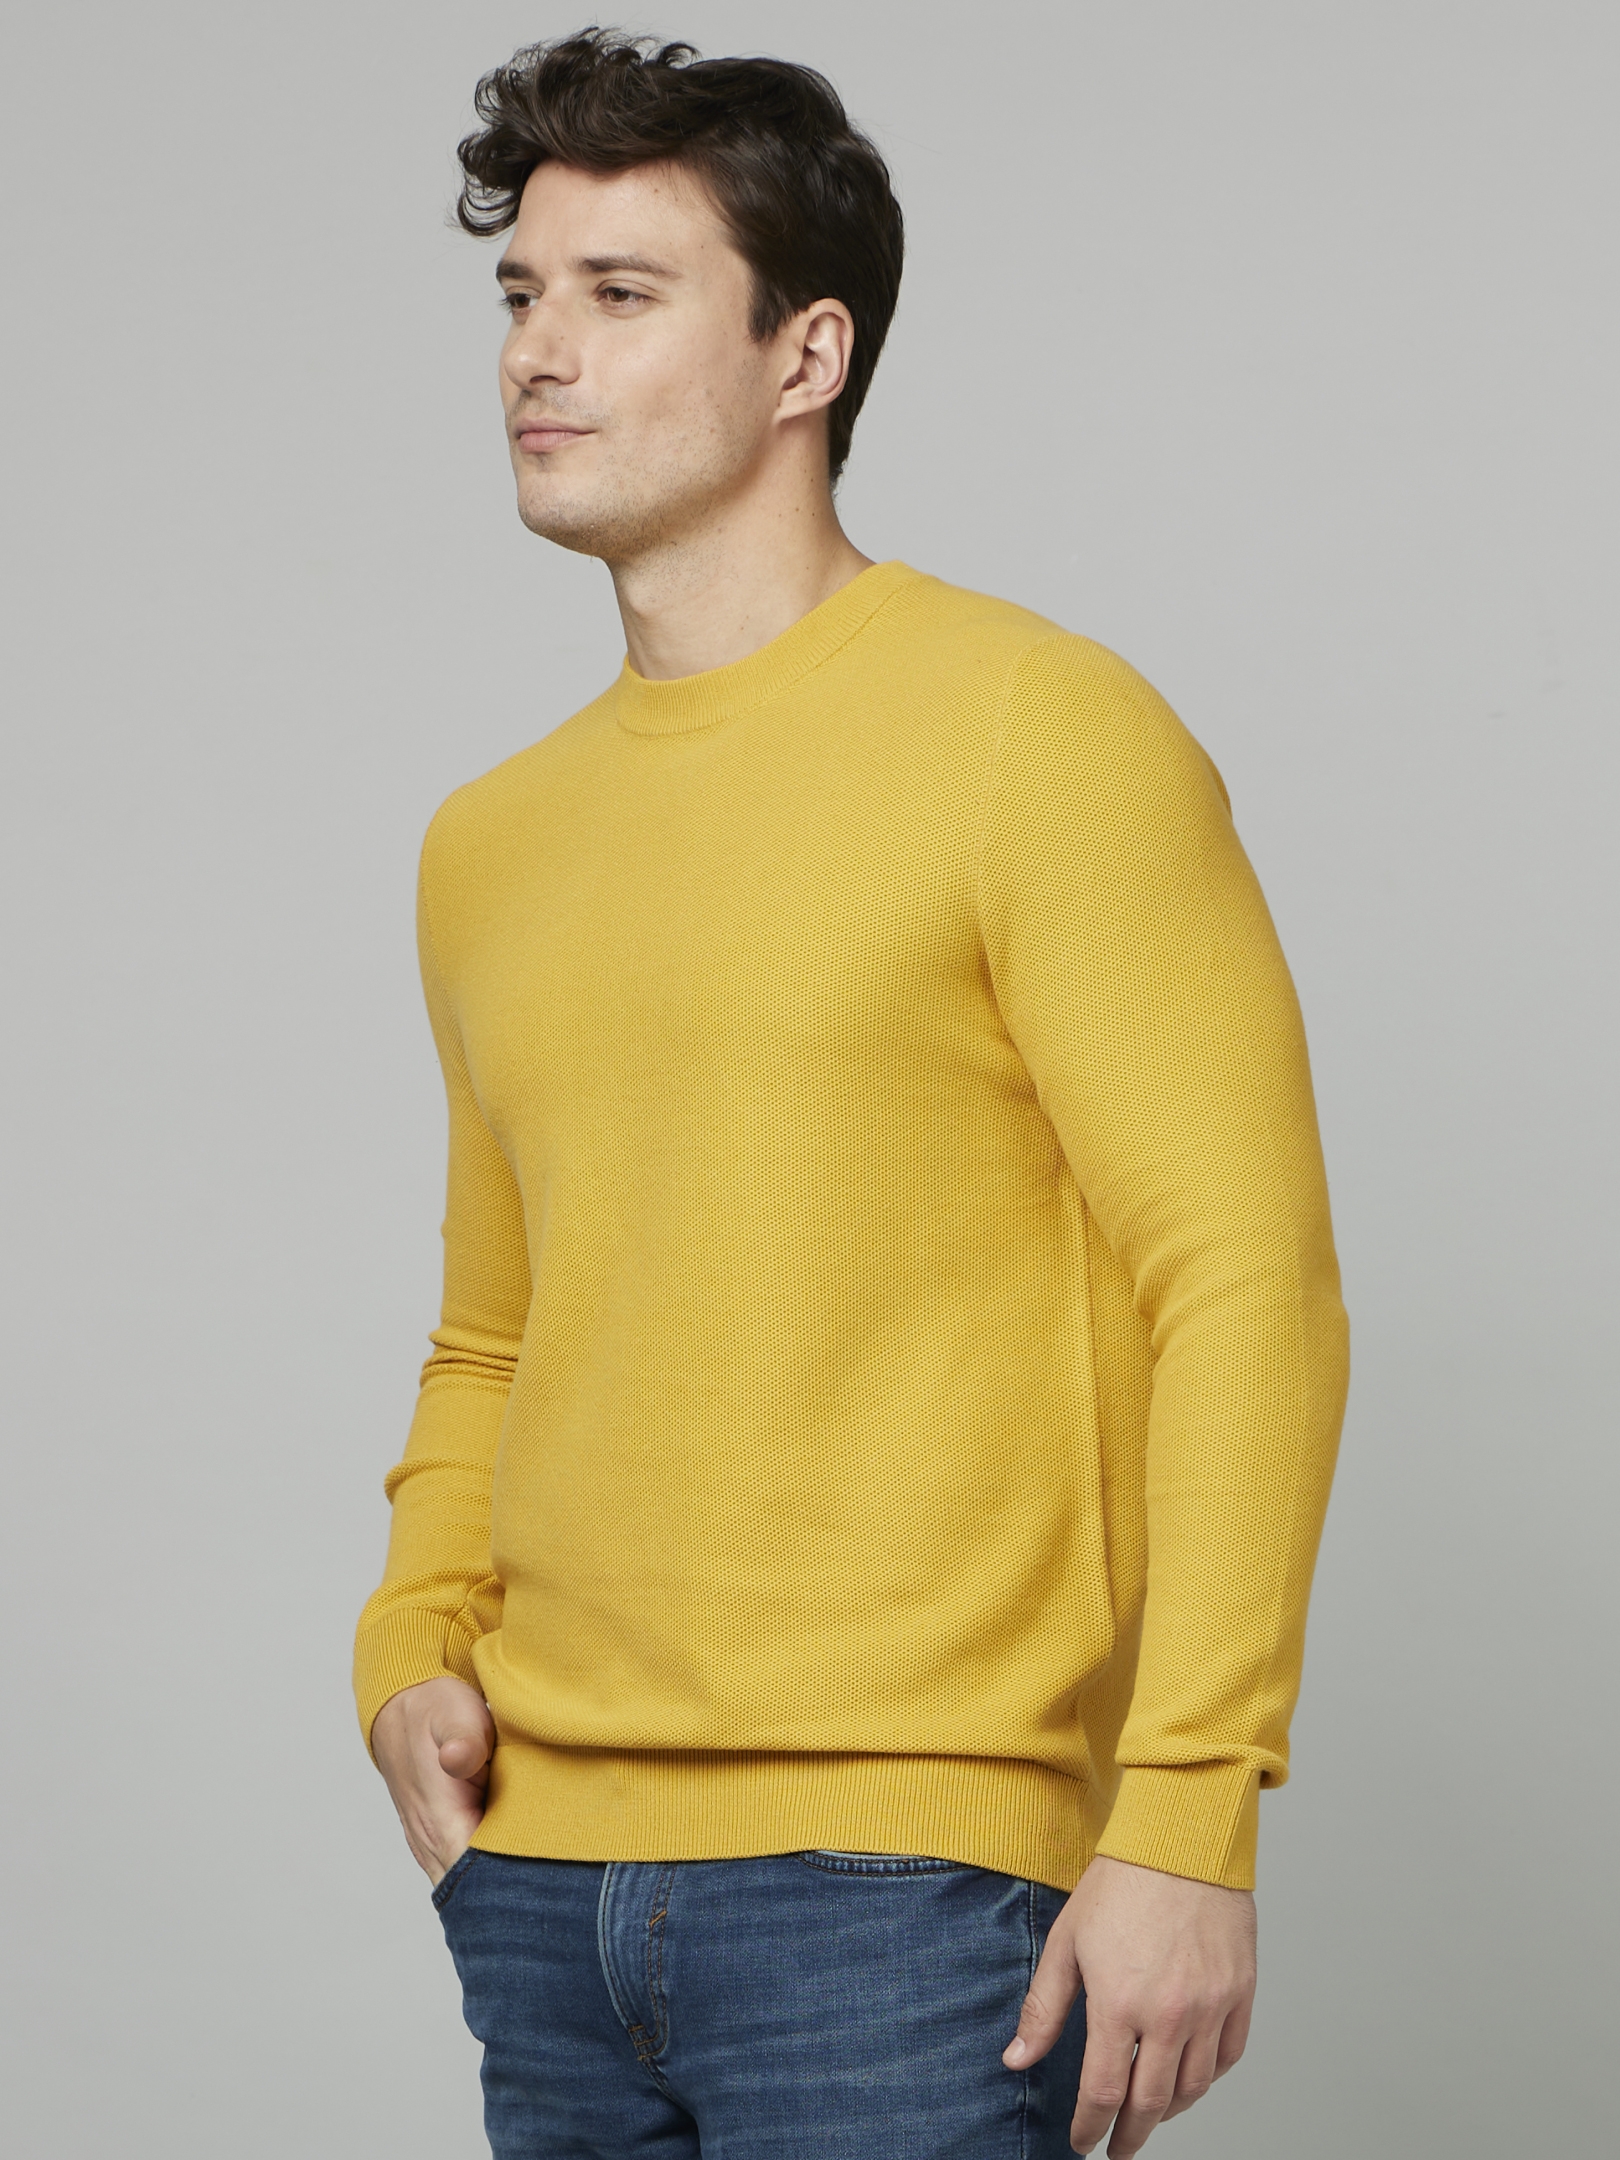 Men's Yellow Solid Sweaters